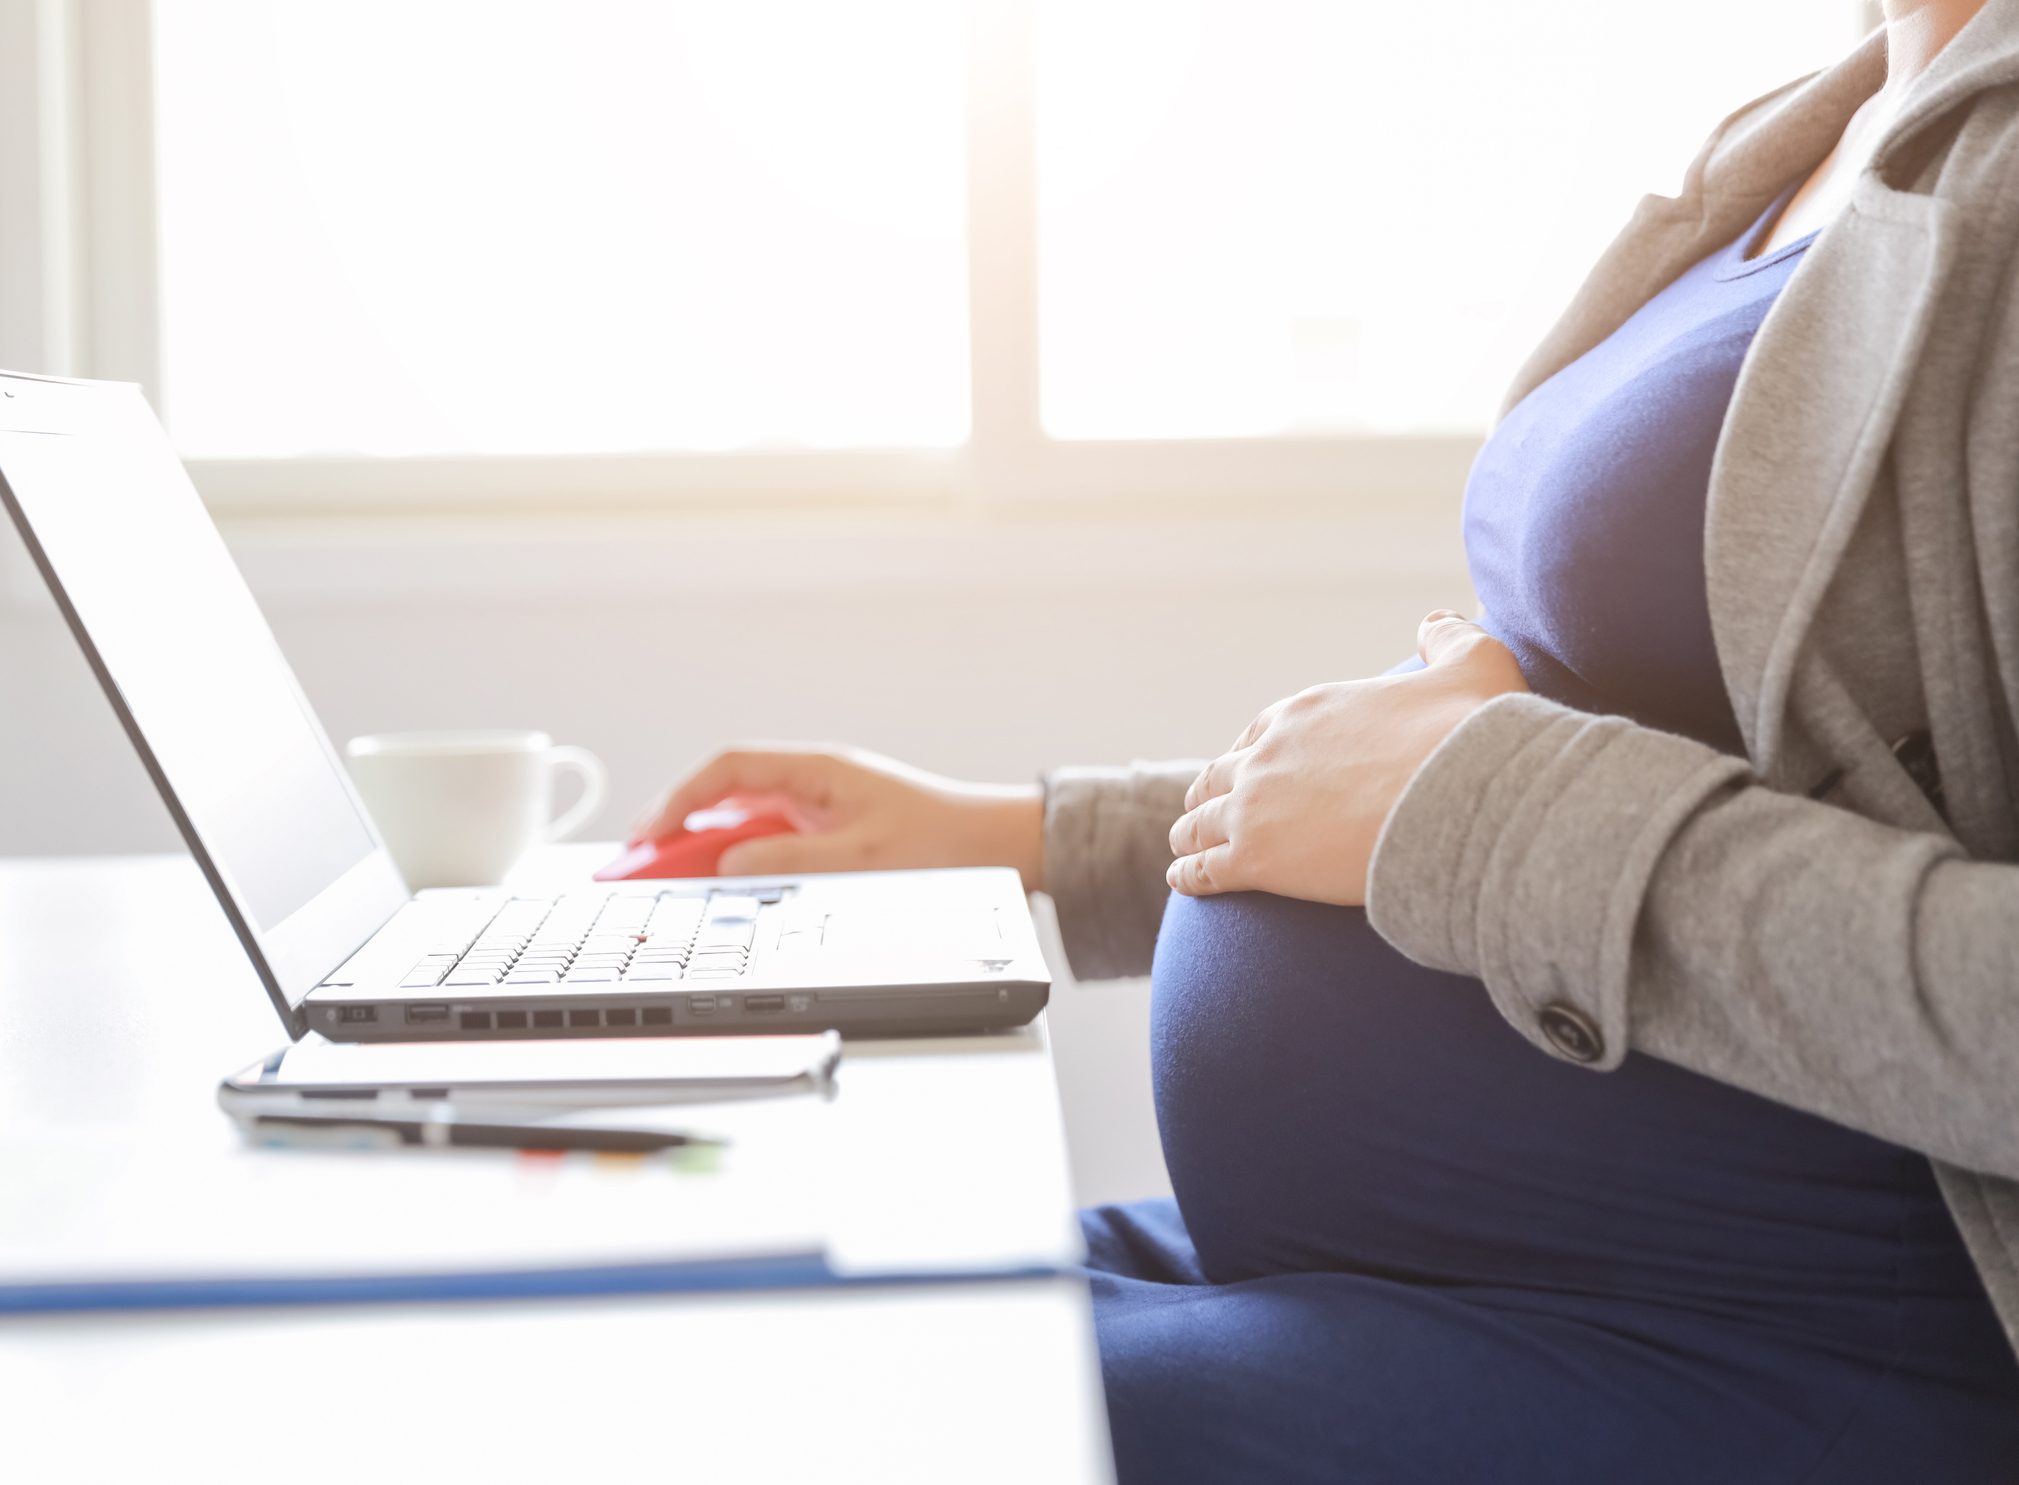 Stock Image of Pregnant Business Woman Sitting at Desk with One Hand on Her Pregnant Belly and the Other Hand on Laptop Mouse. We Cannot See Her Face But It Appears She Is Working on the Laptop